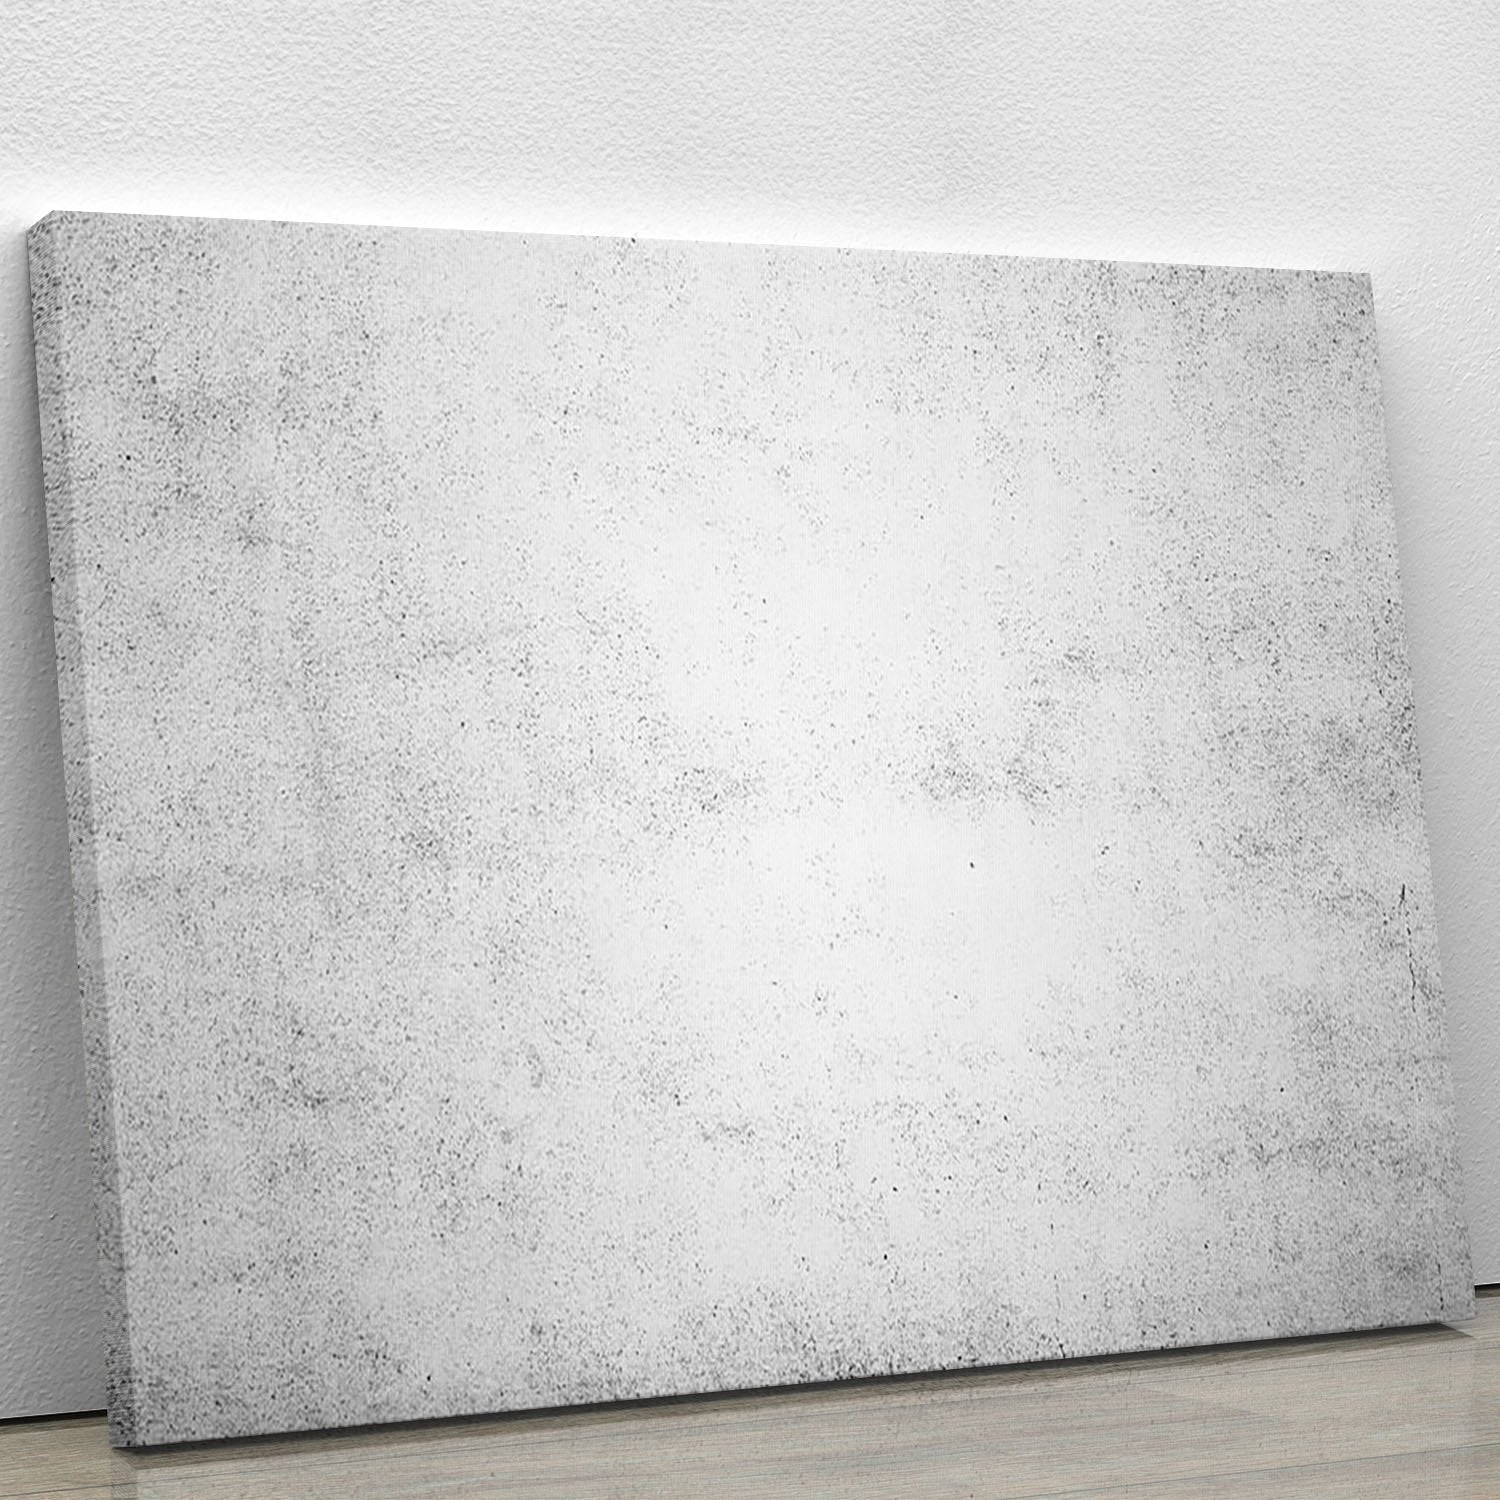 Grunge wall texture Canvas Print or Poster